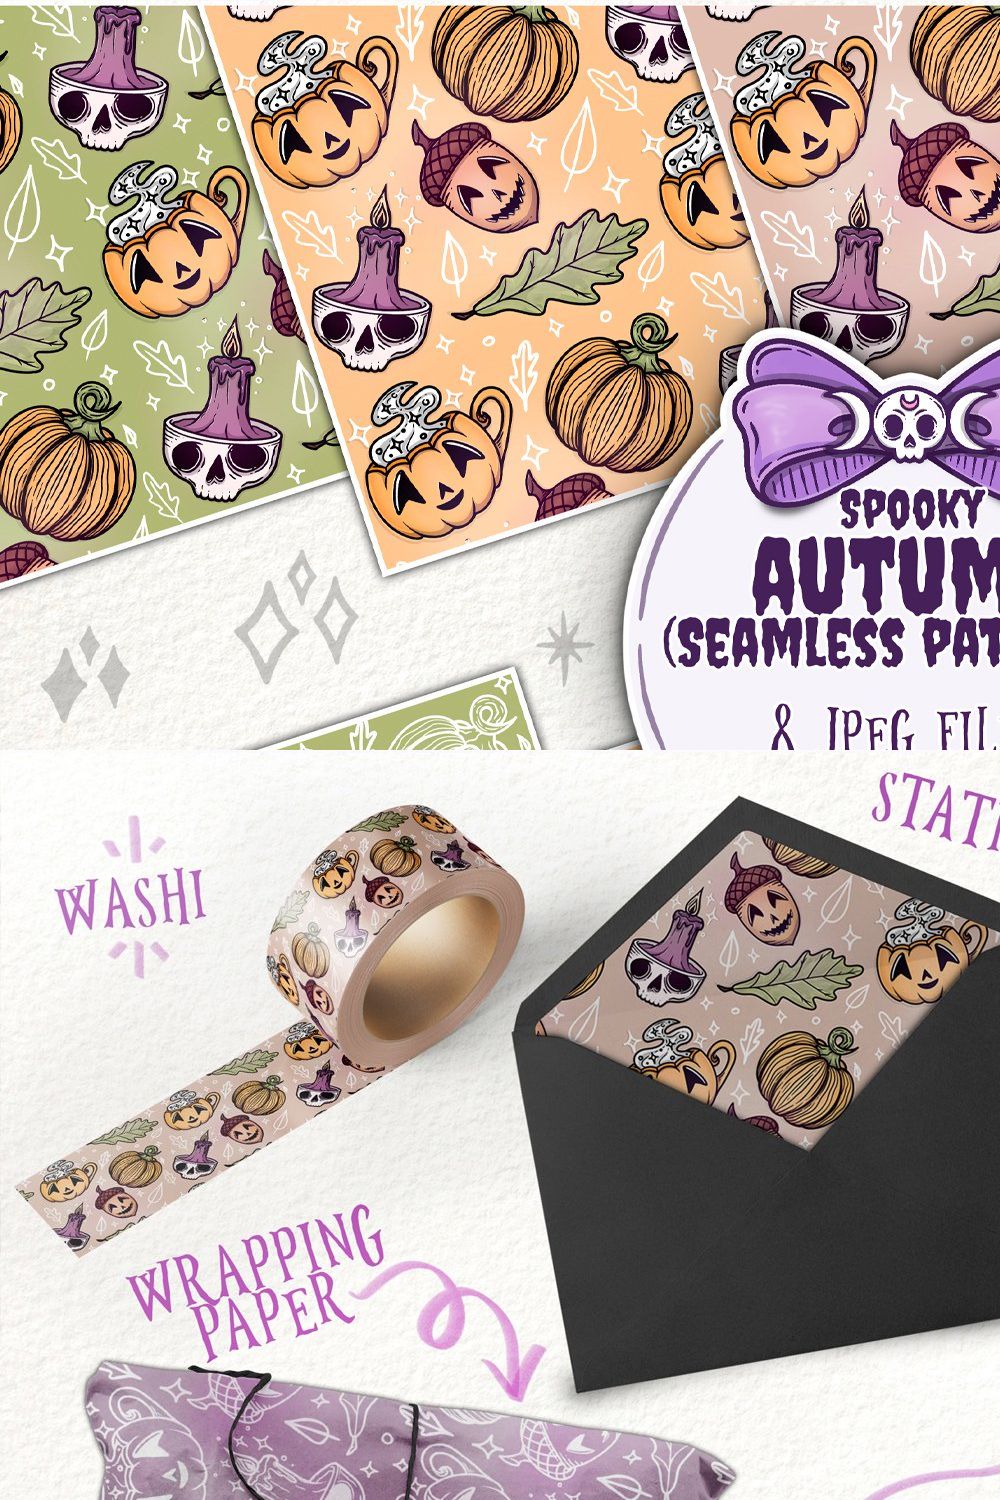 Spooky Autumn seamless pattern pack pinterest preview image.